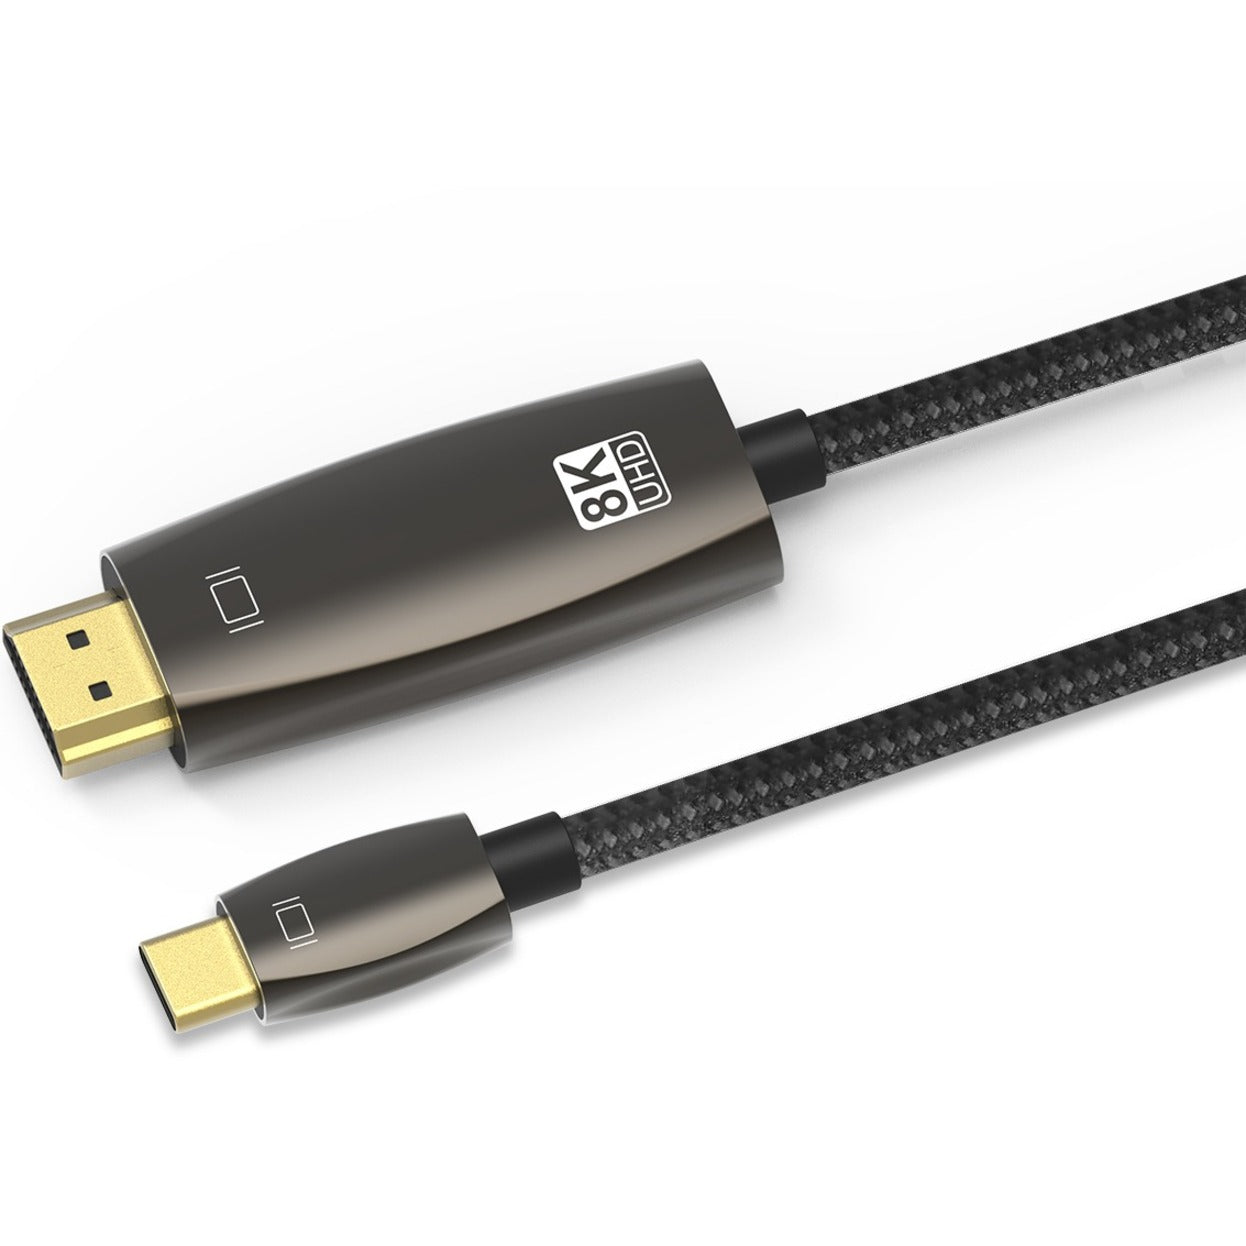 4XEM 4XTPC023B2M 8K/4K 2M USB-C to HDMI Cable, Plug & Play, Active, 32.4 Gbit/s Data Transfer Rate, 7680 x 4320 Supported Resolution